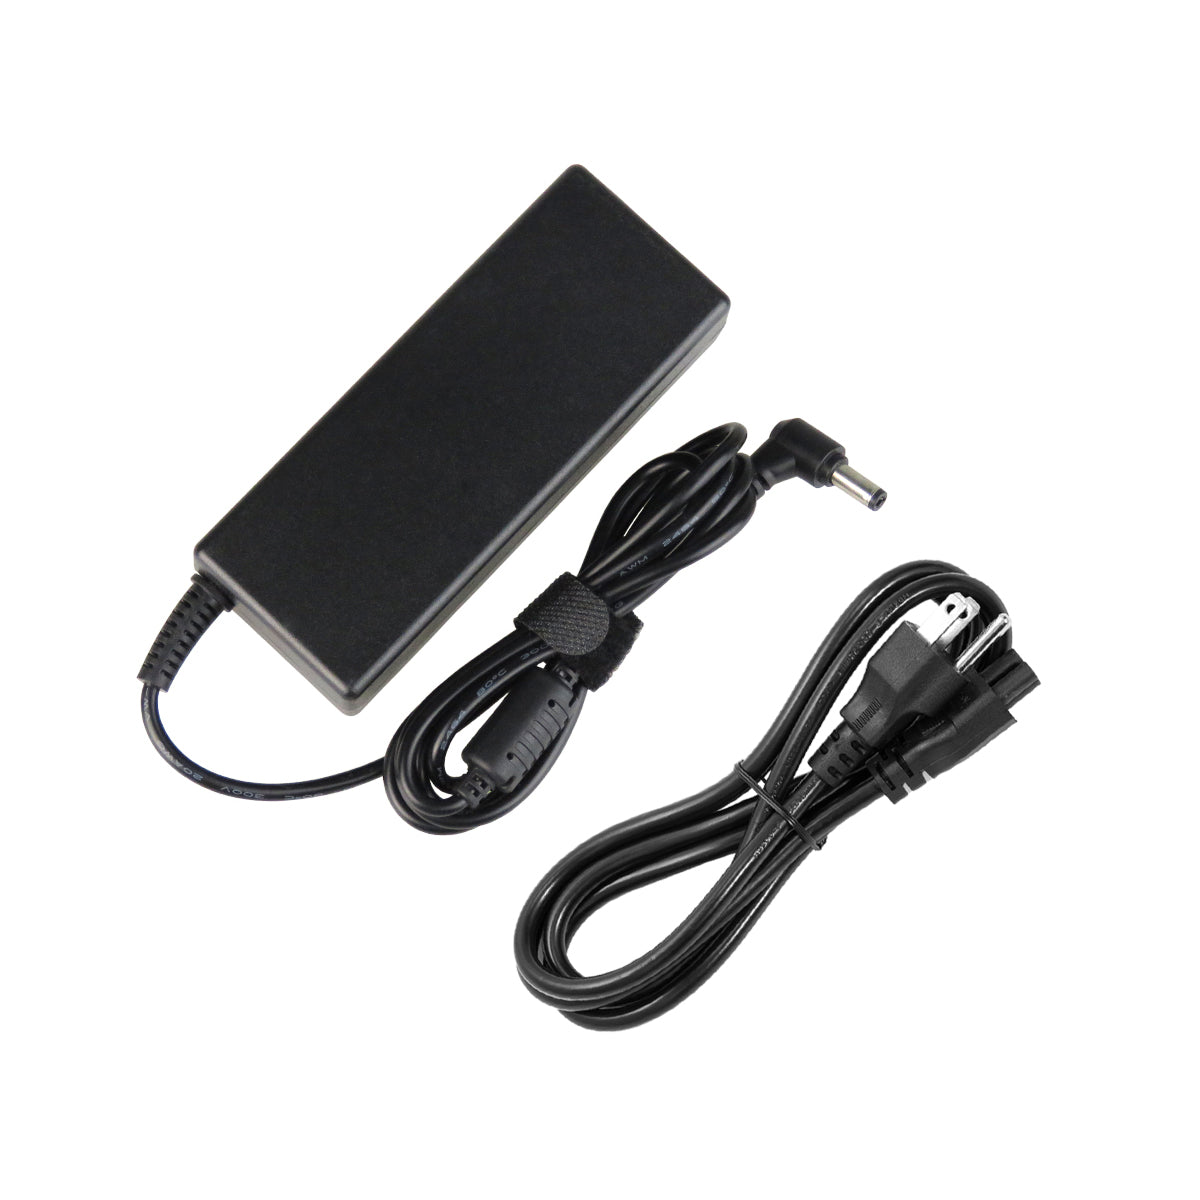 AC Adapter Charger for Gateway MX6200 Notebook.